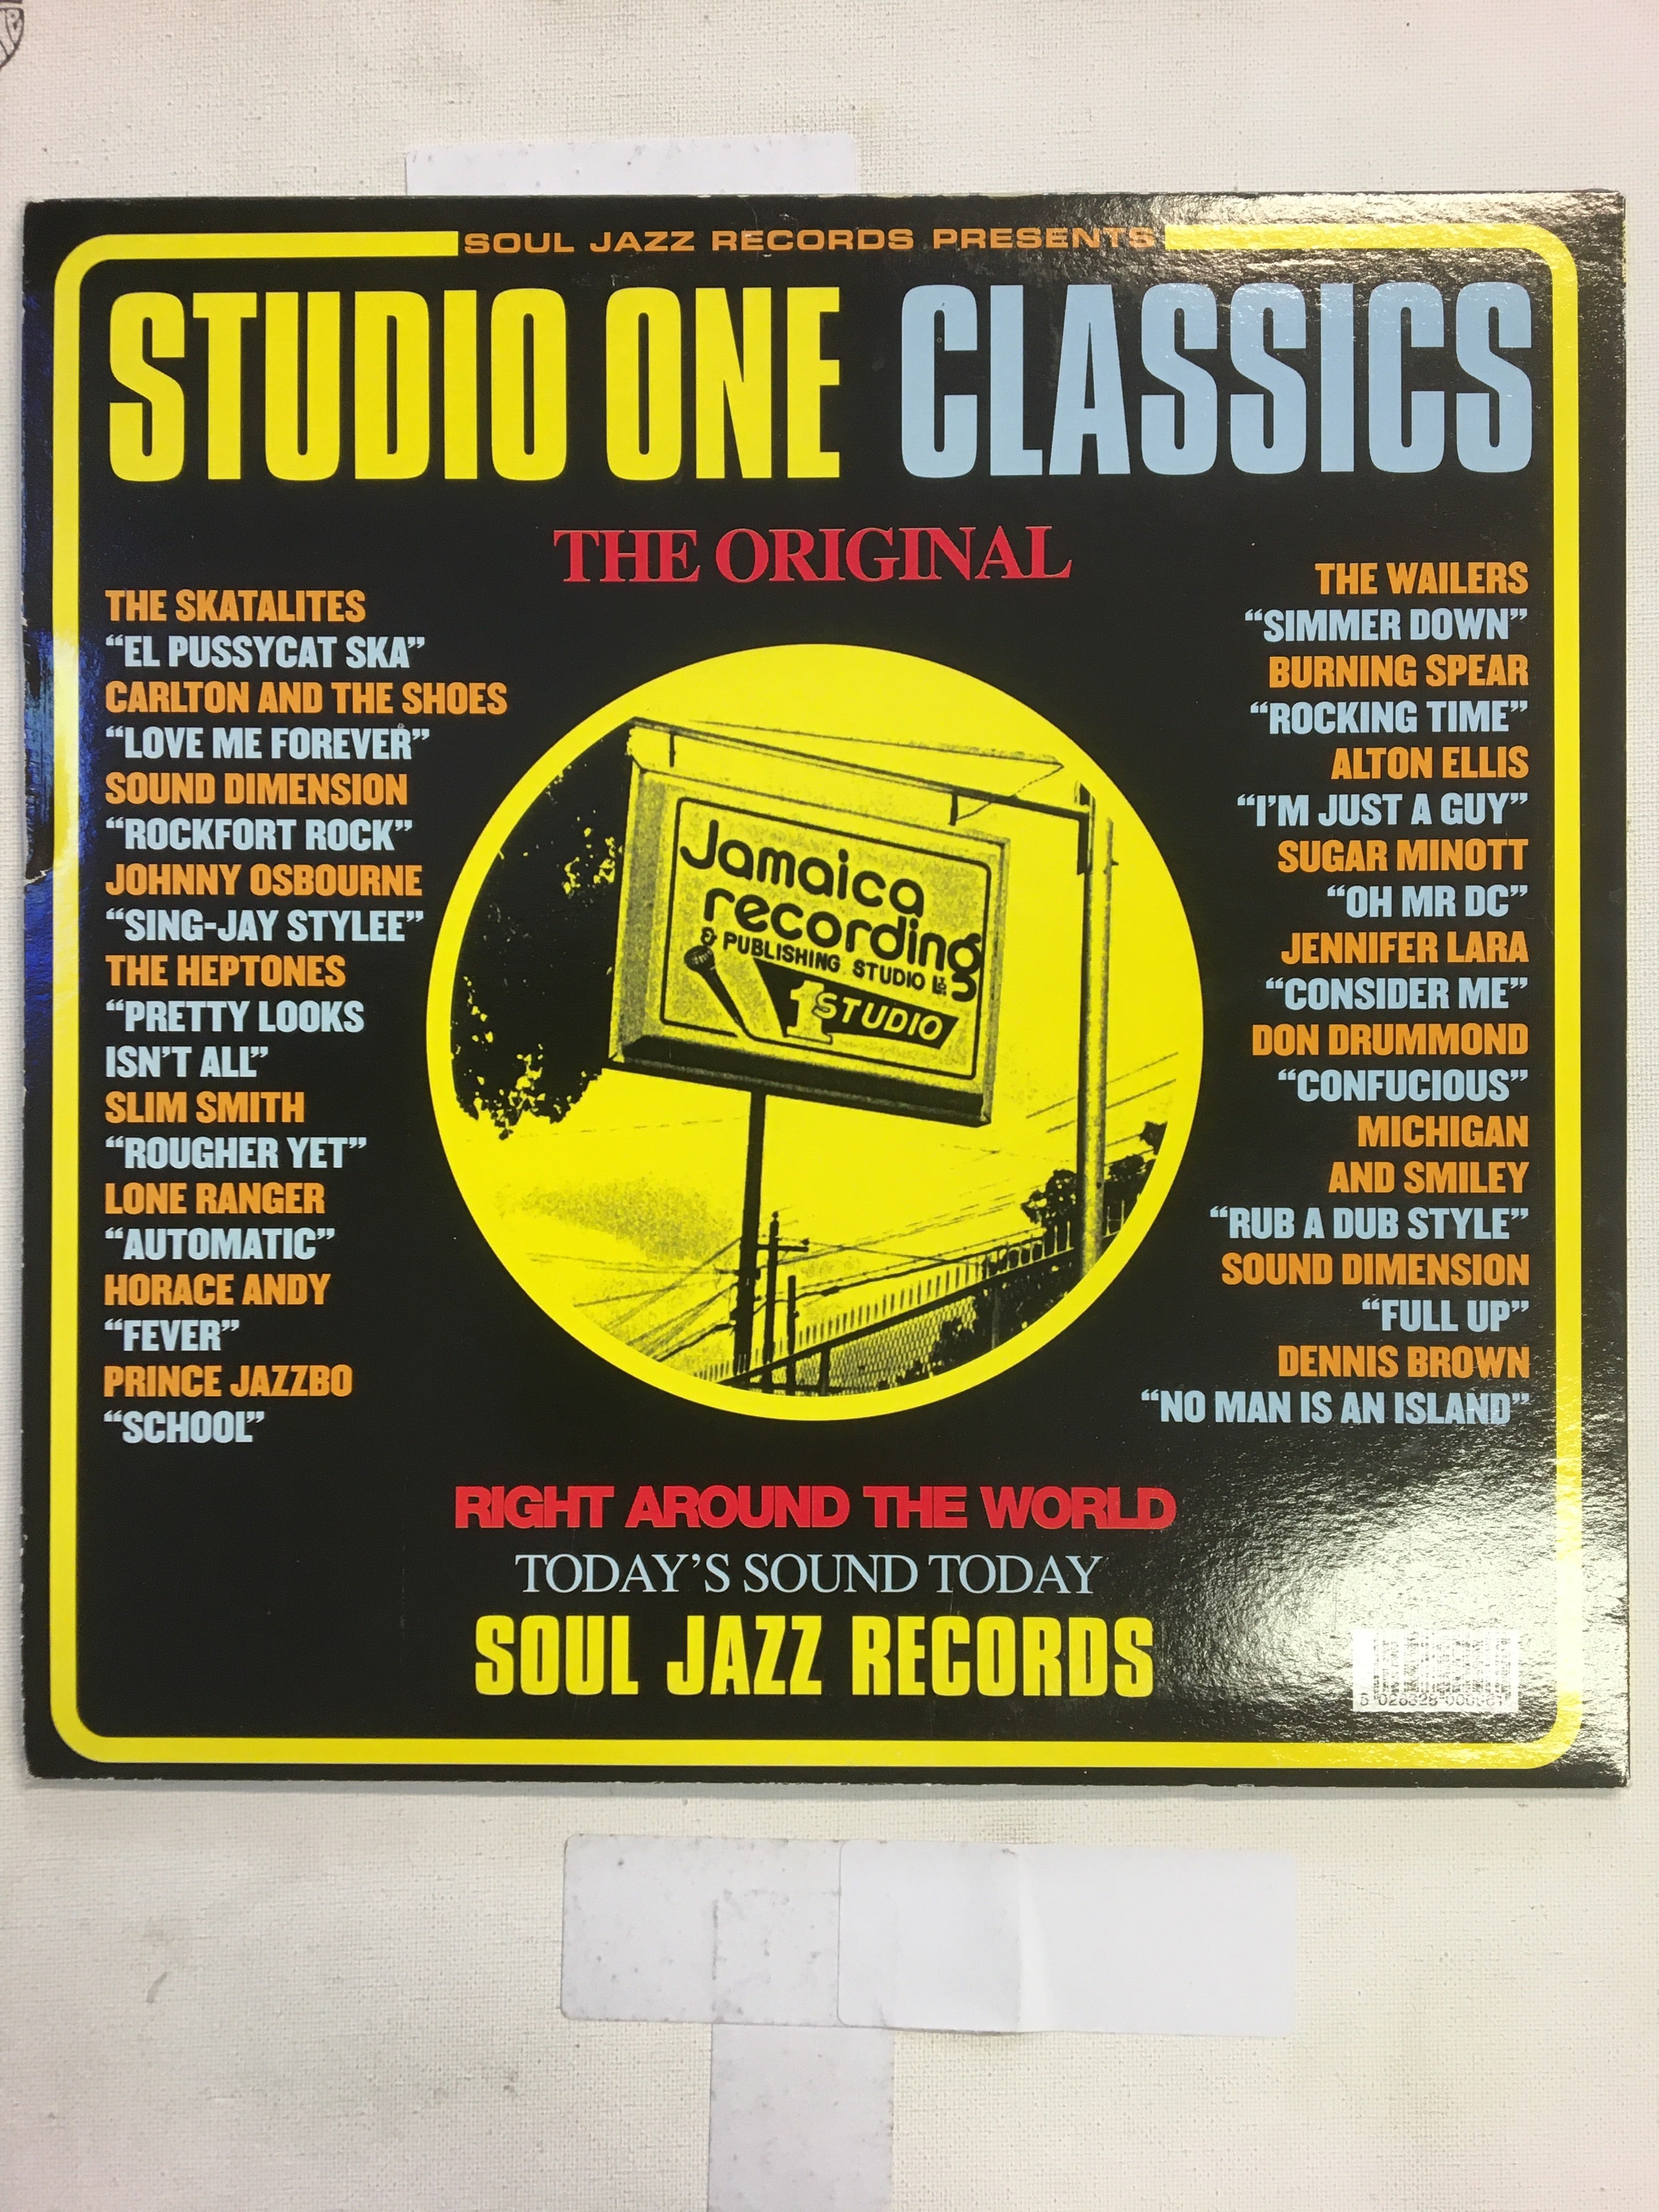 STUDIO ONE CLASSICS – Grind and Groove Records